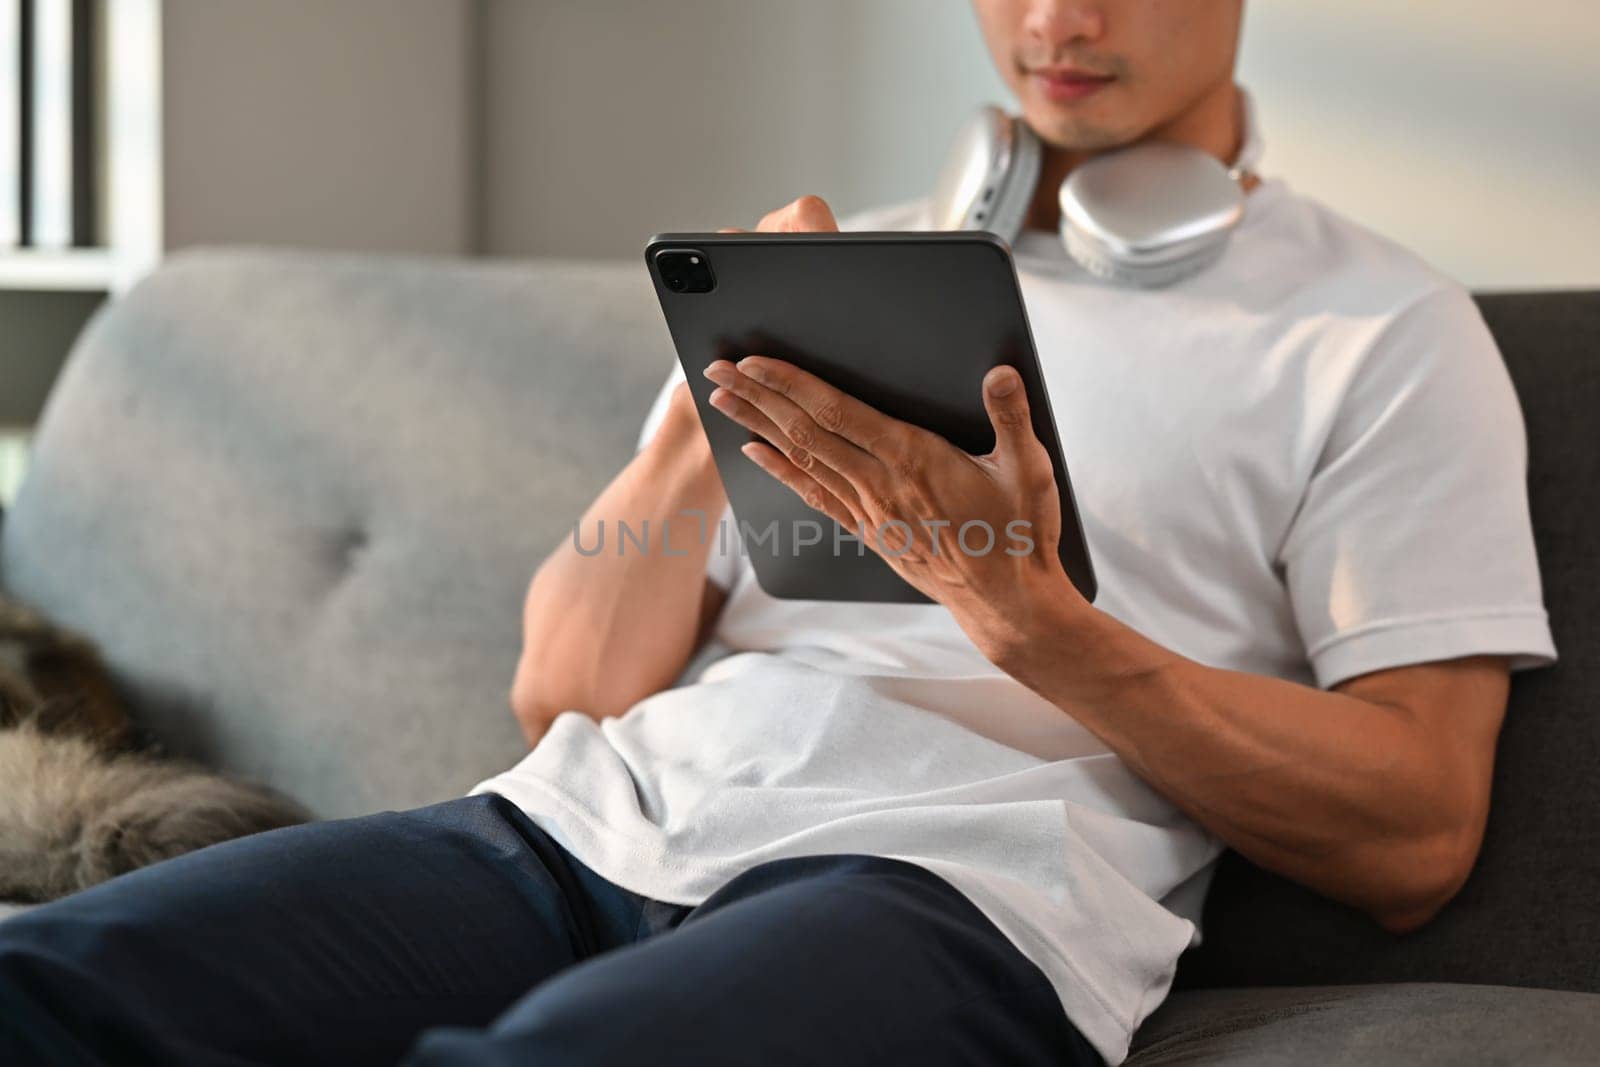 Man in casual clothes and headphone on neck using digital tablet on couch. People, technology and communication concept.